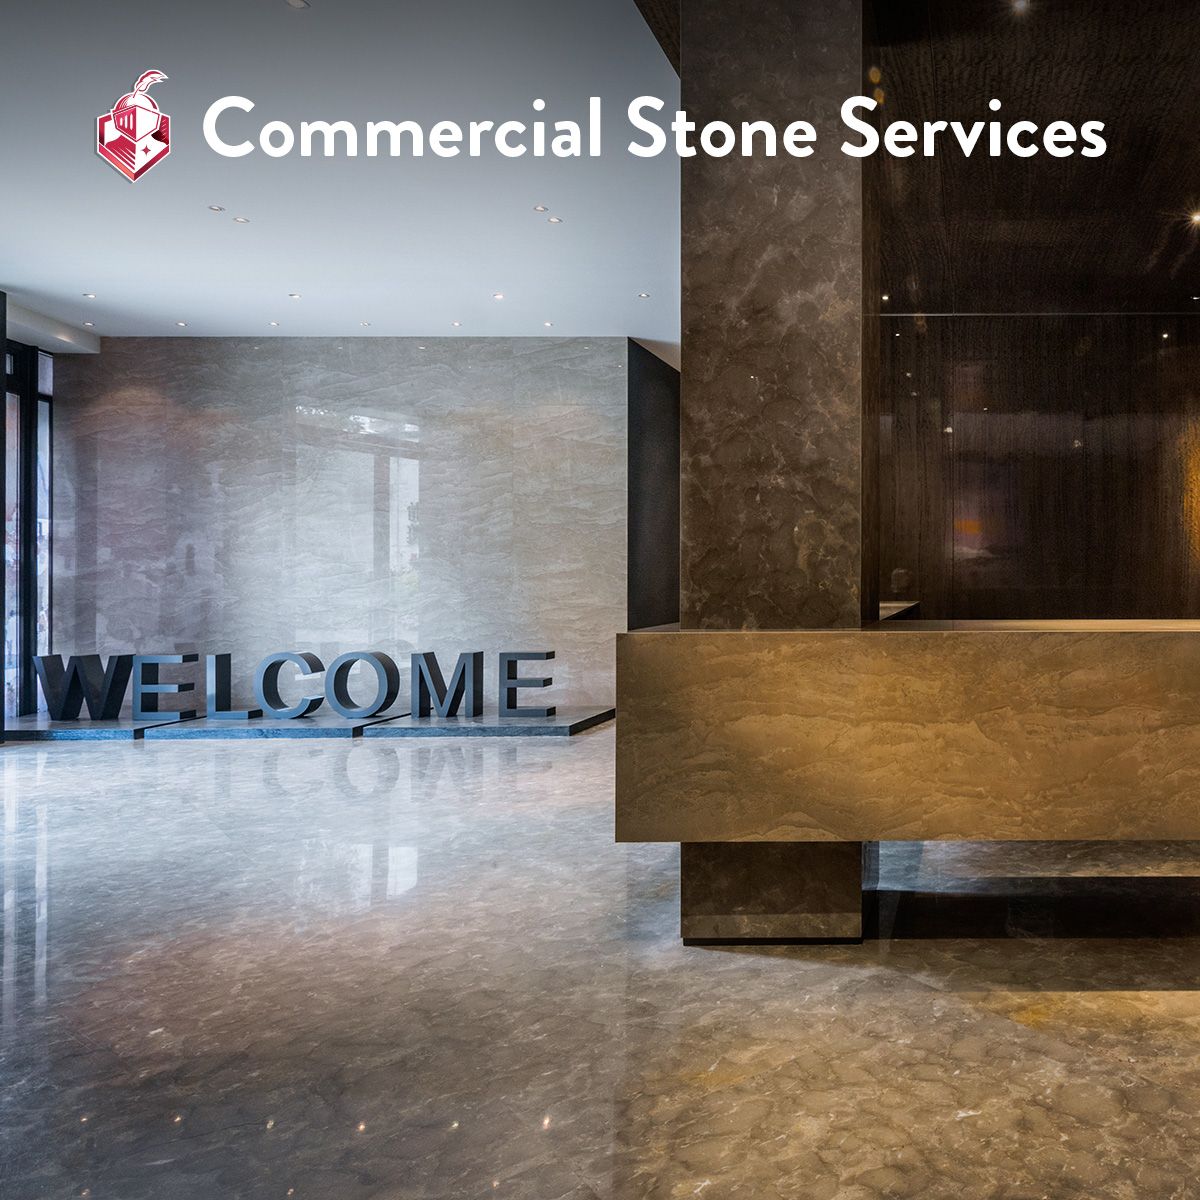 Commercial Stone Services